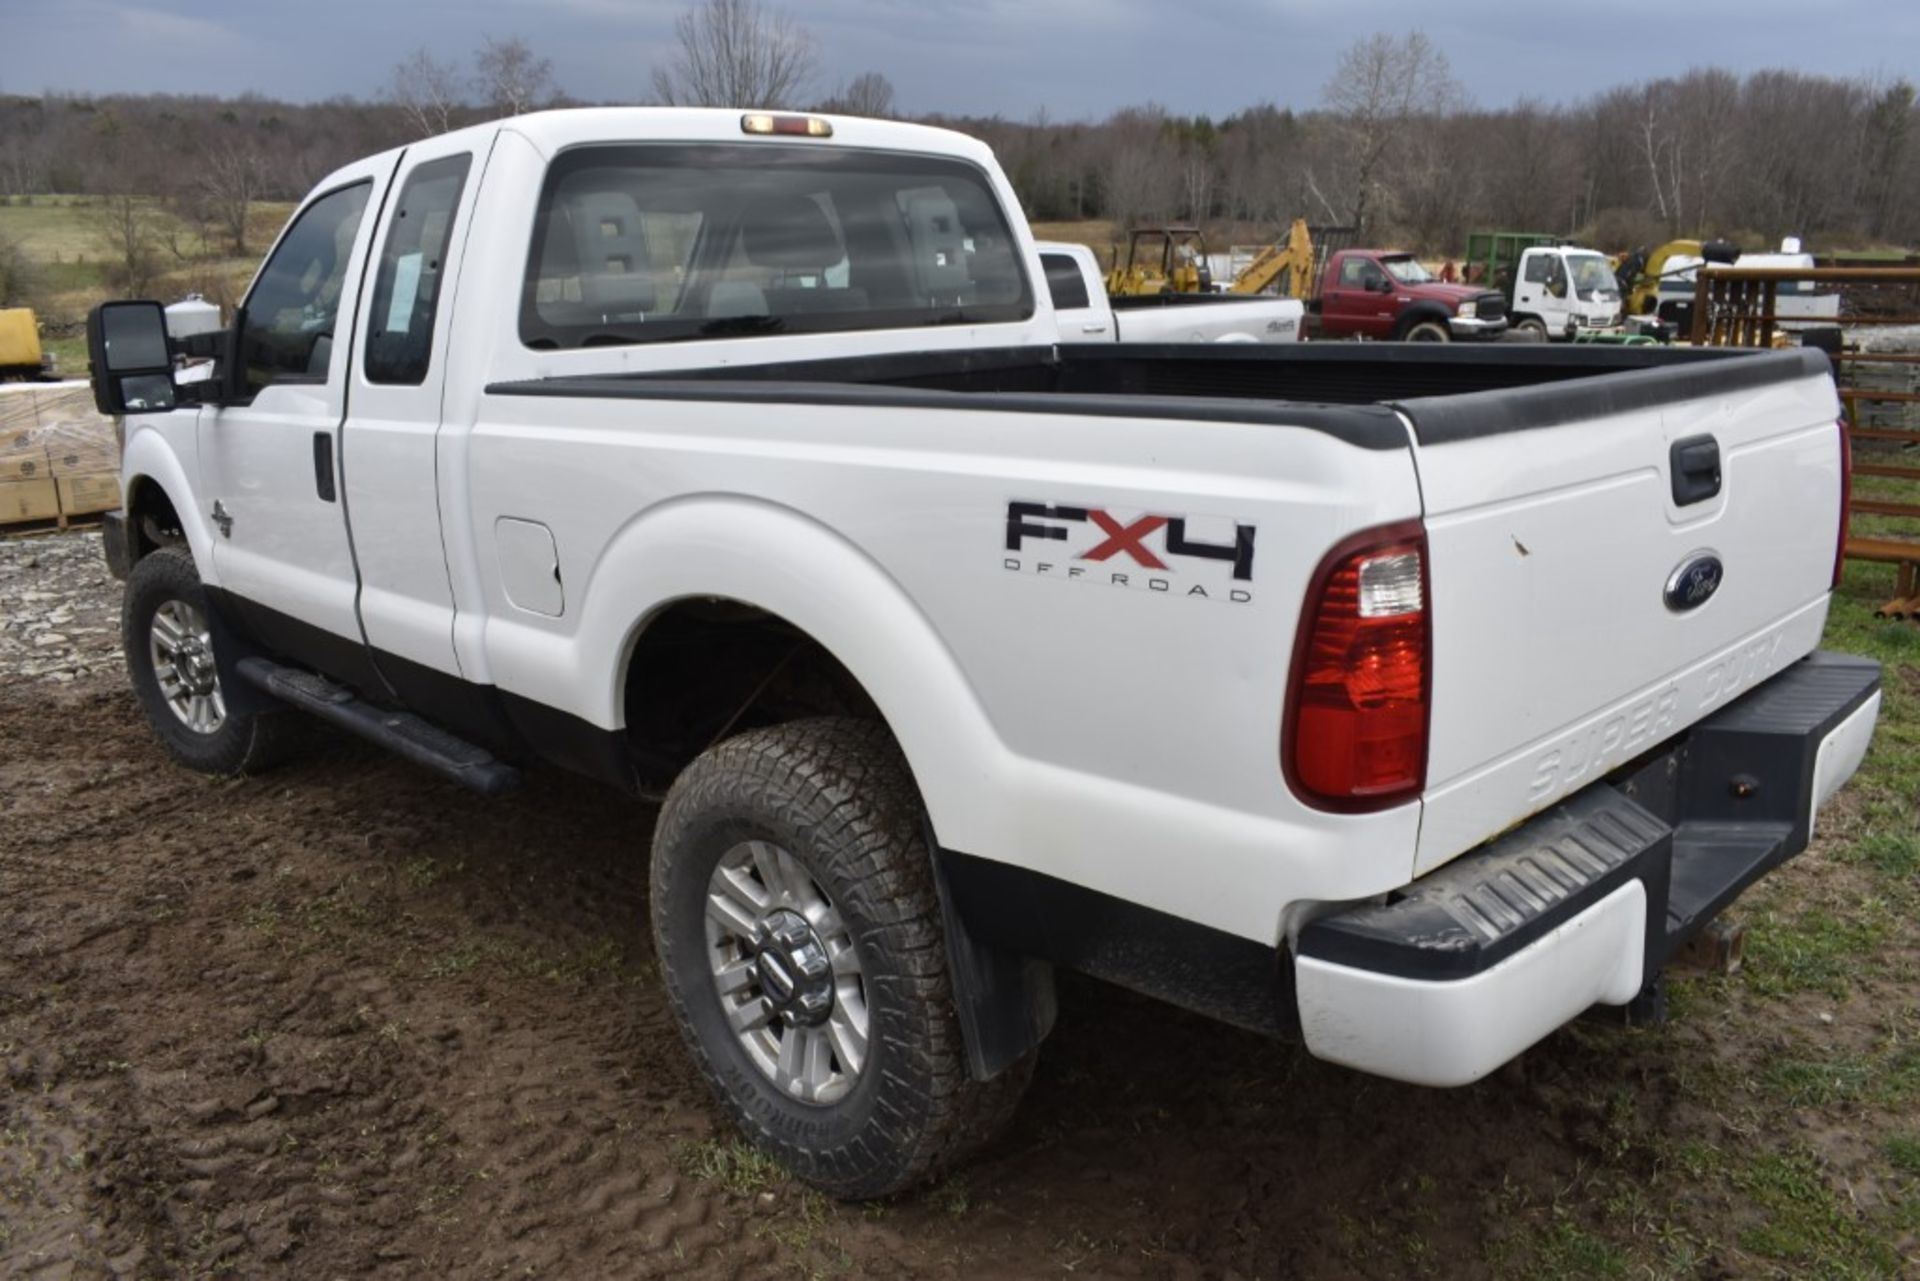 2011 Ford F-250 Super Duty Truck - Image 8 of 40